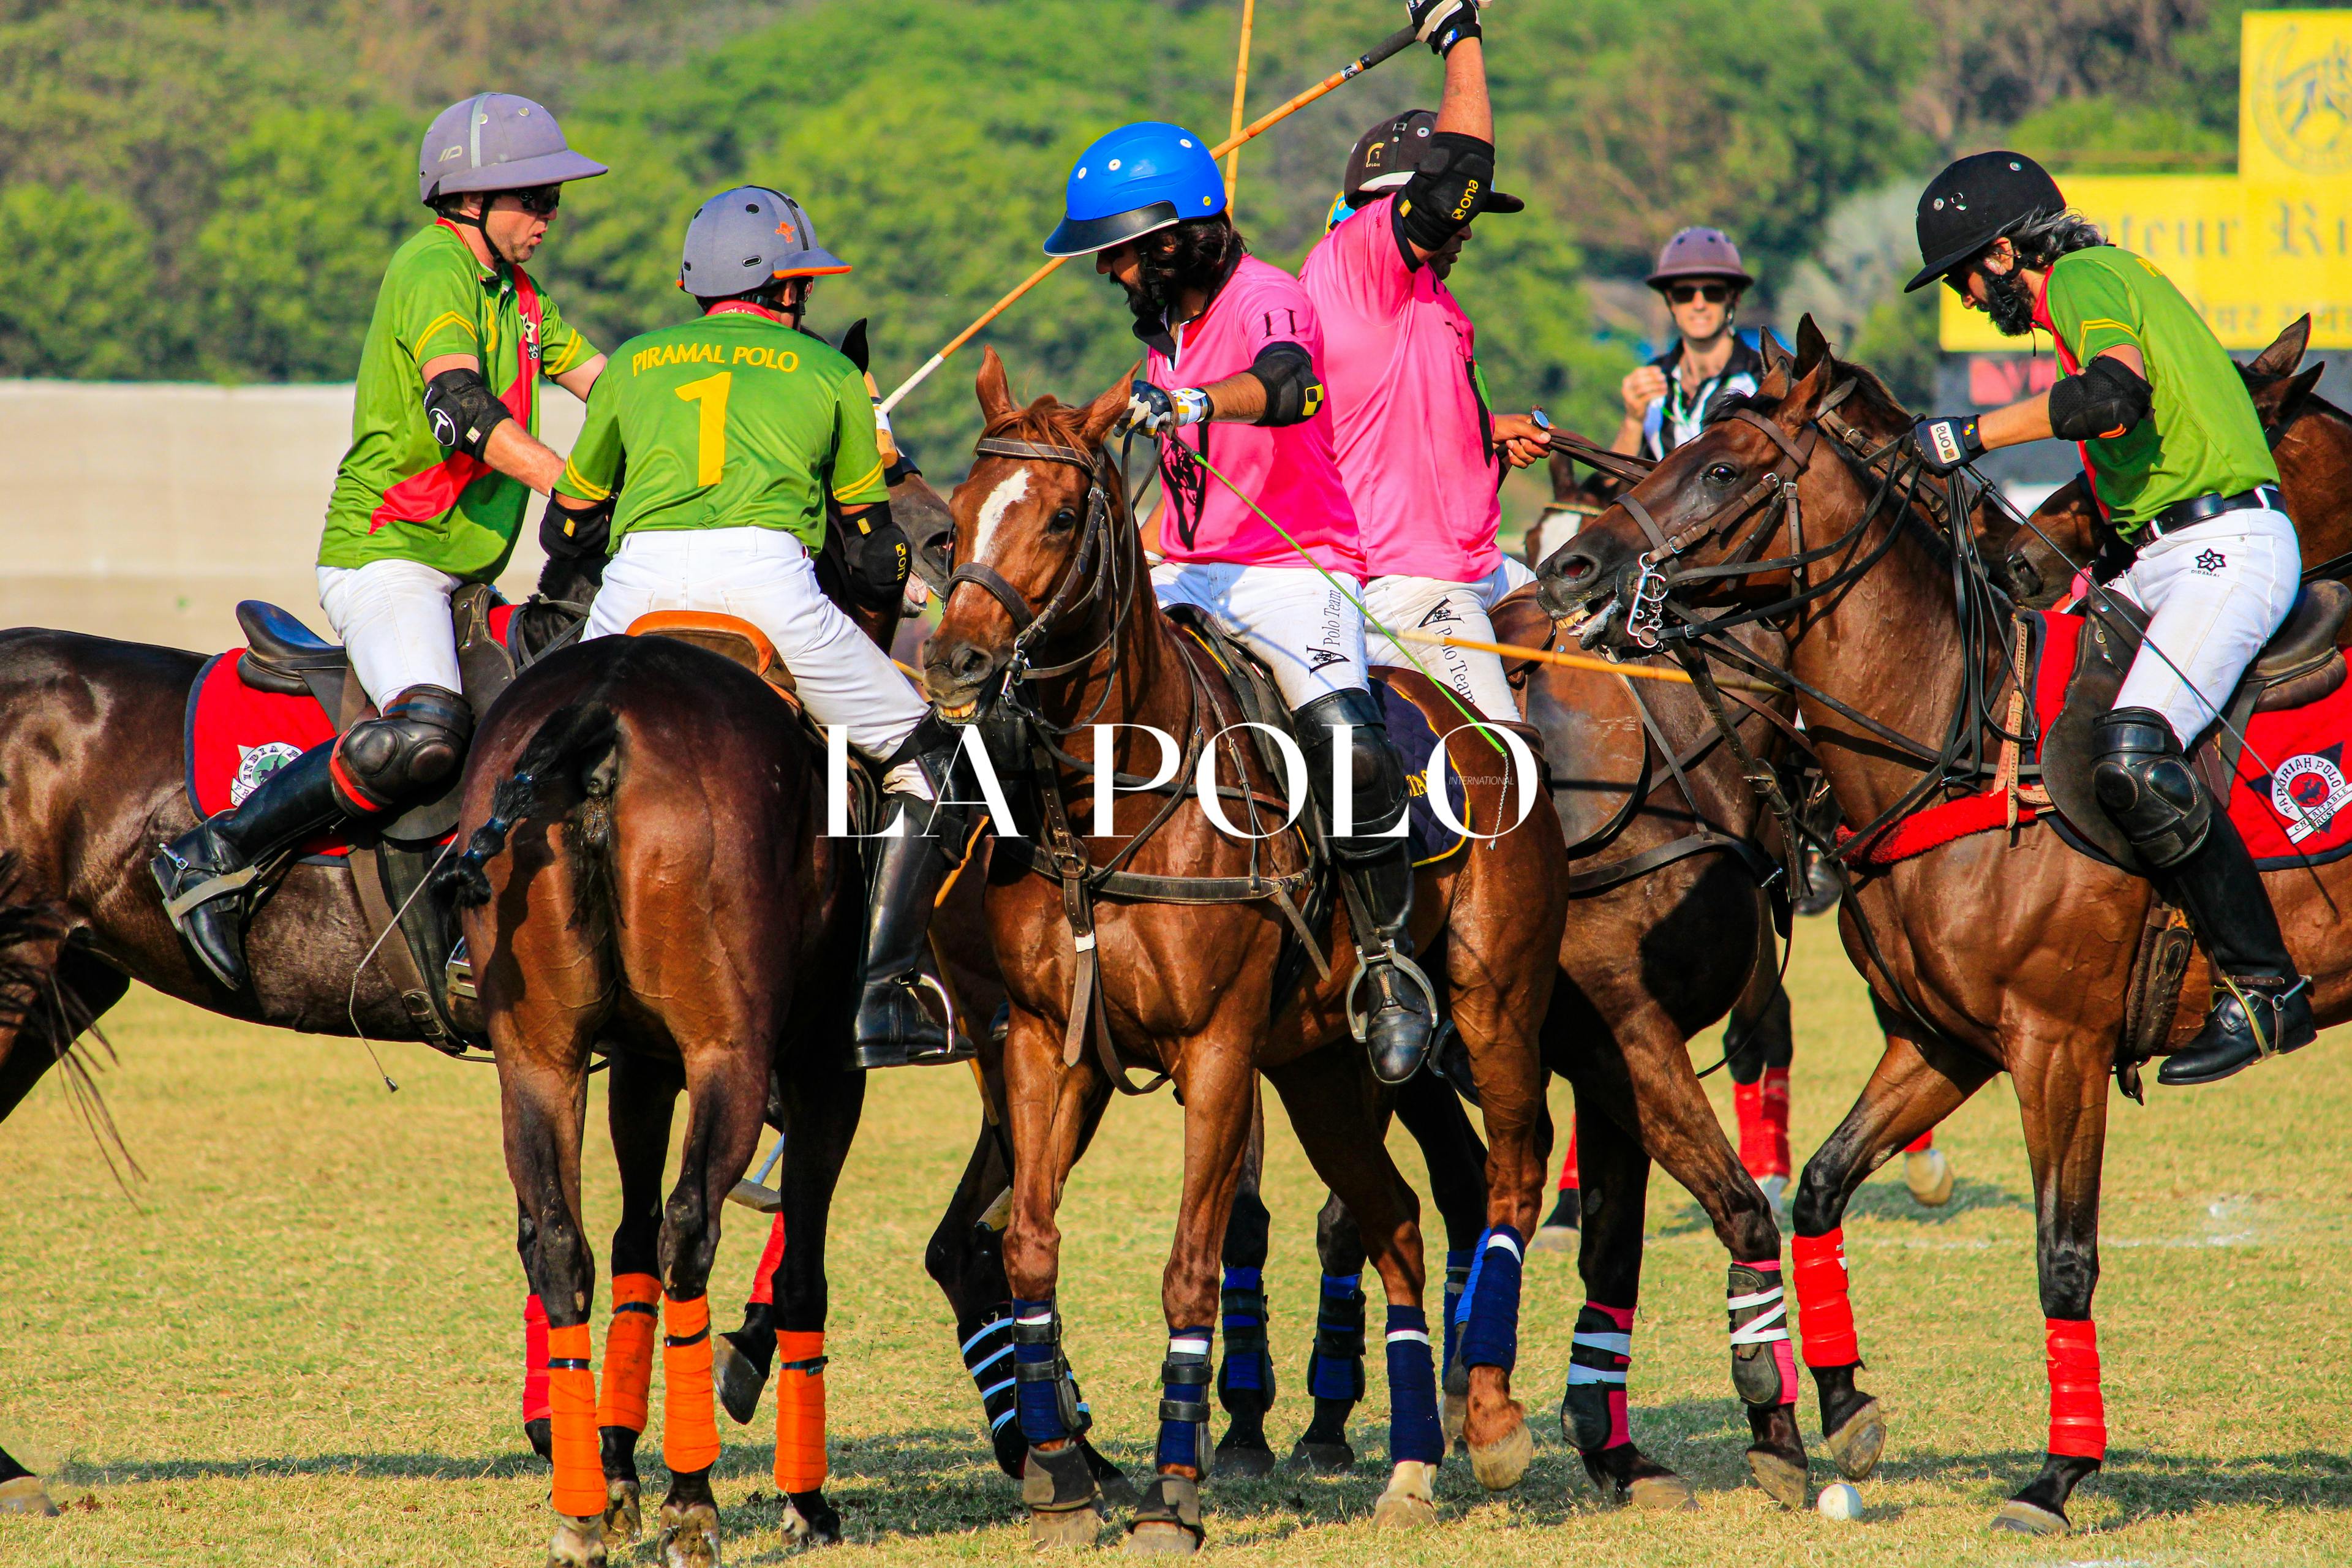 V Polo and DB Realty Achievers in a taut match